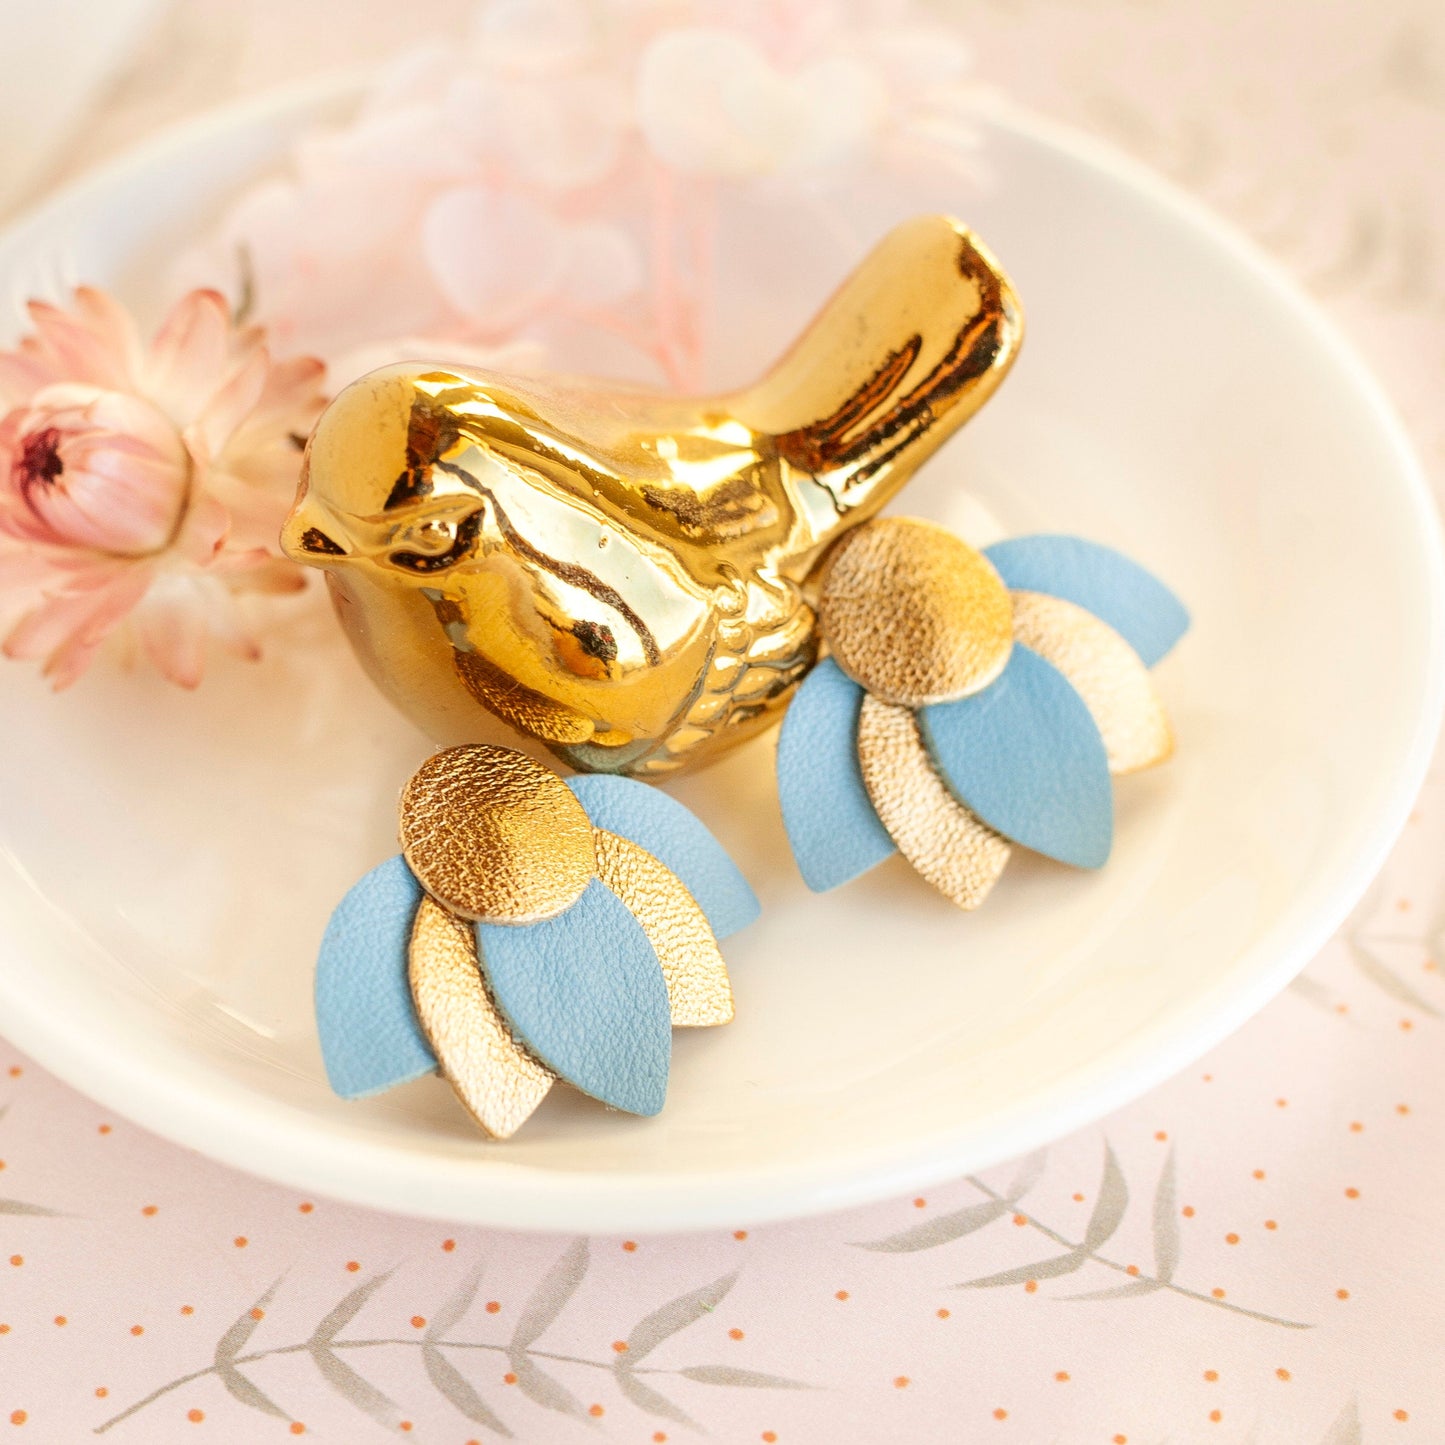 Blue and gold leather earrings